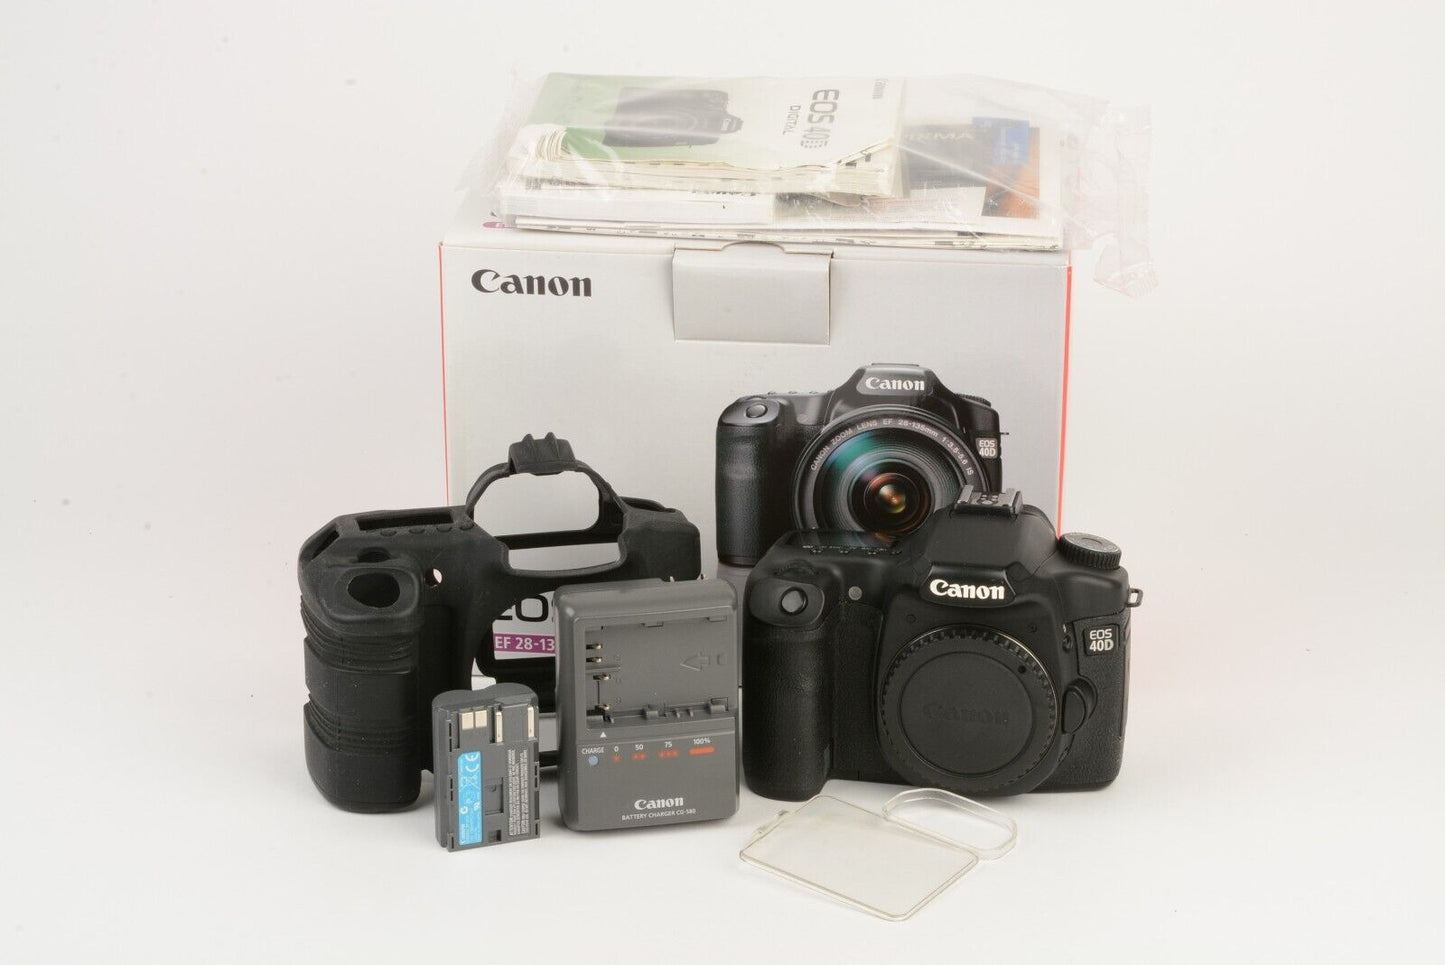 EXC+++ CANON EOS 40D BODY ONLY, 2BATTS, CHARGER, RUBBER SHELL, MANUALS 8625 ACTS